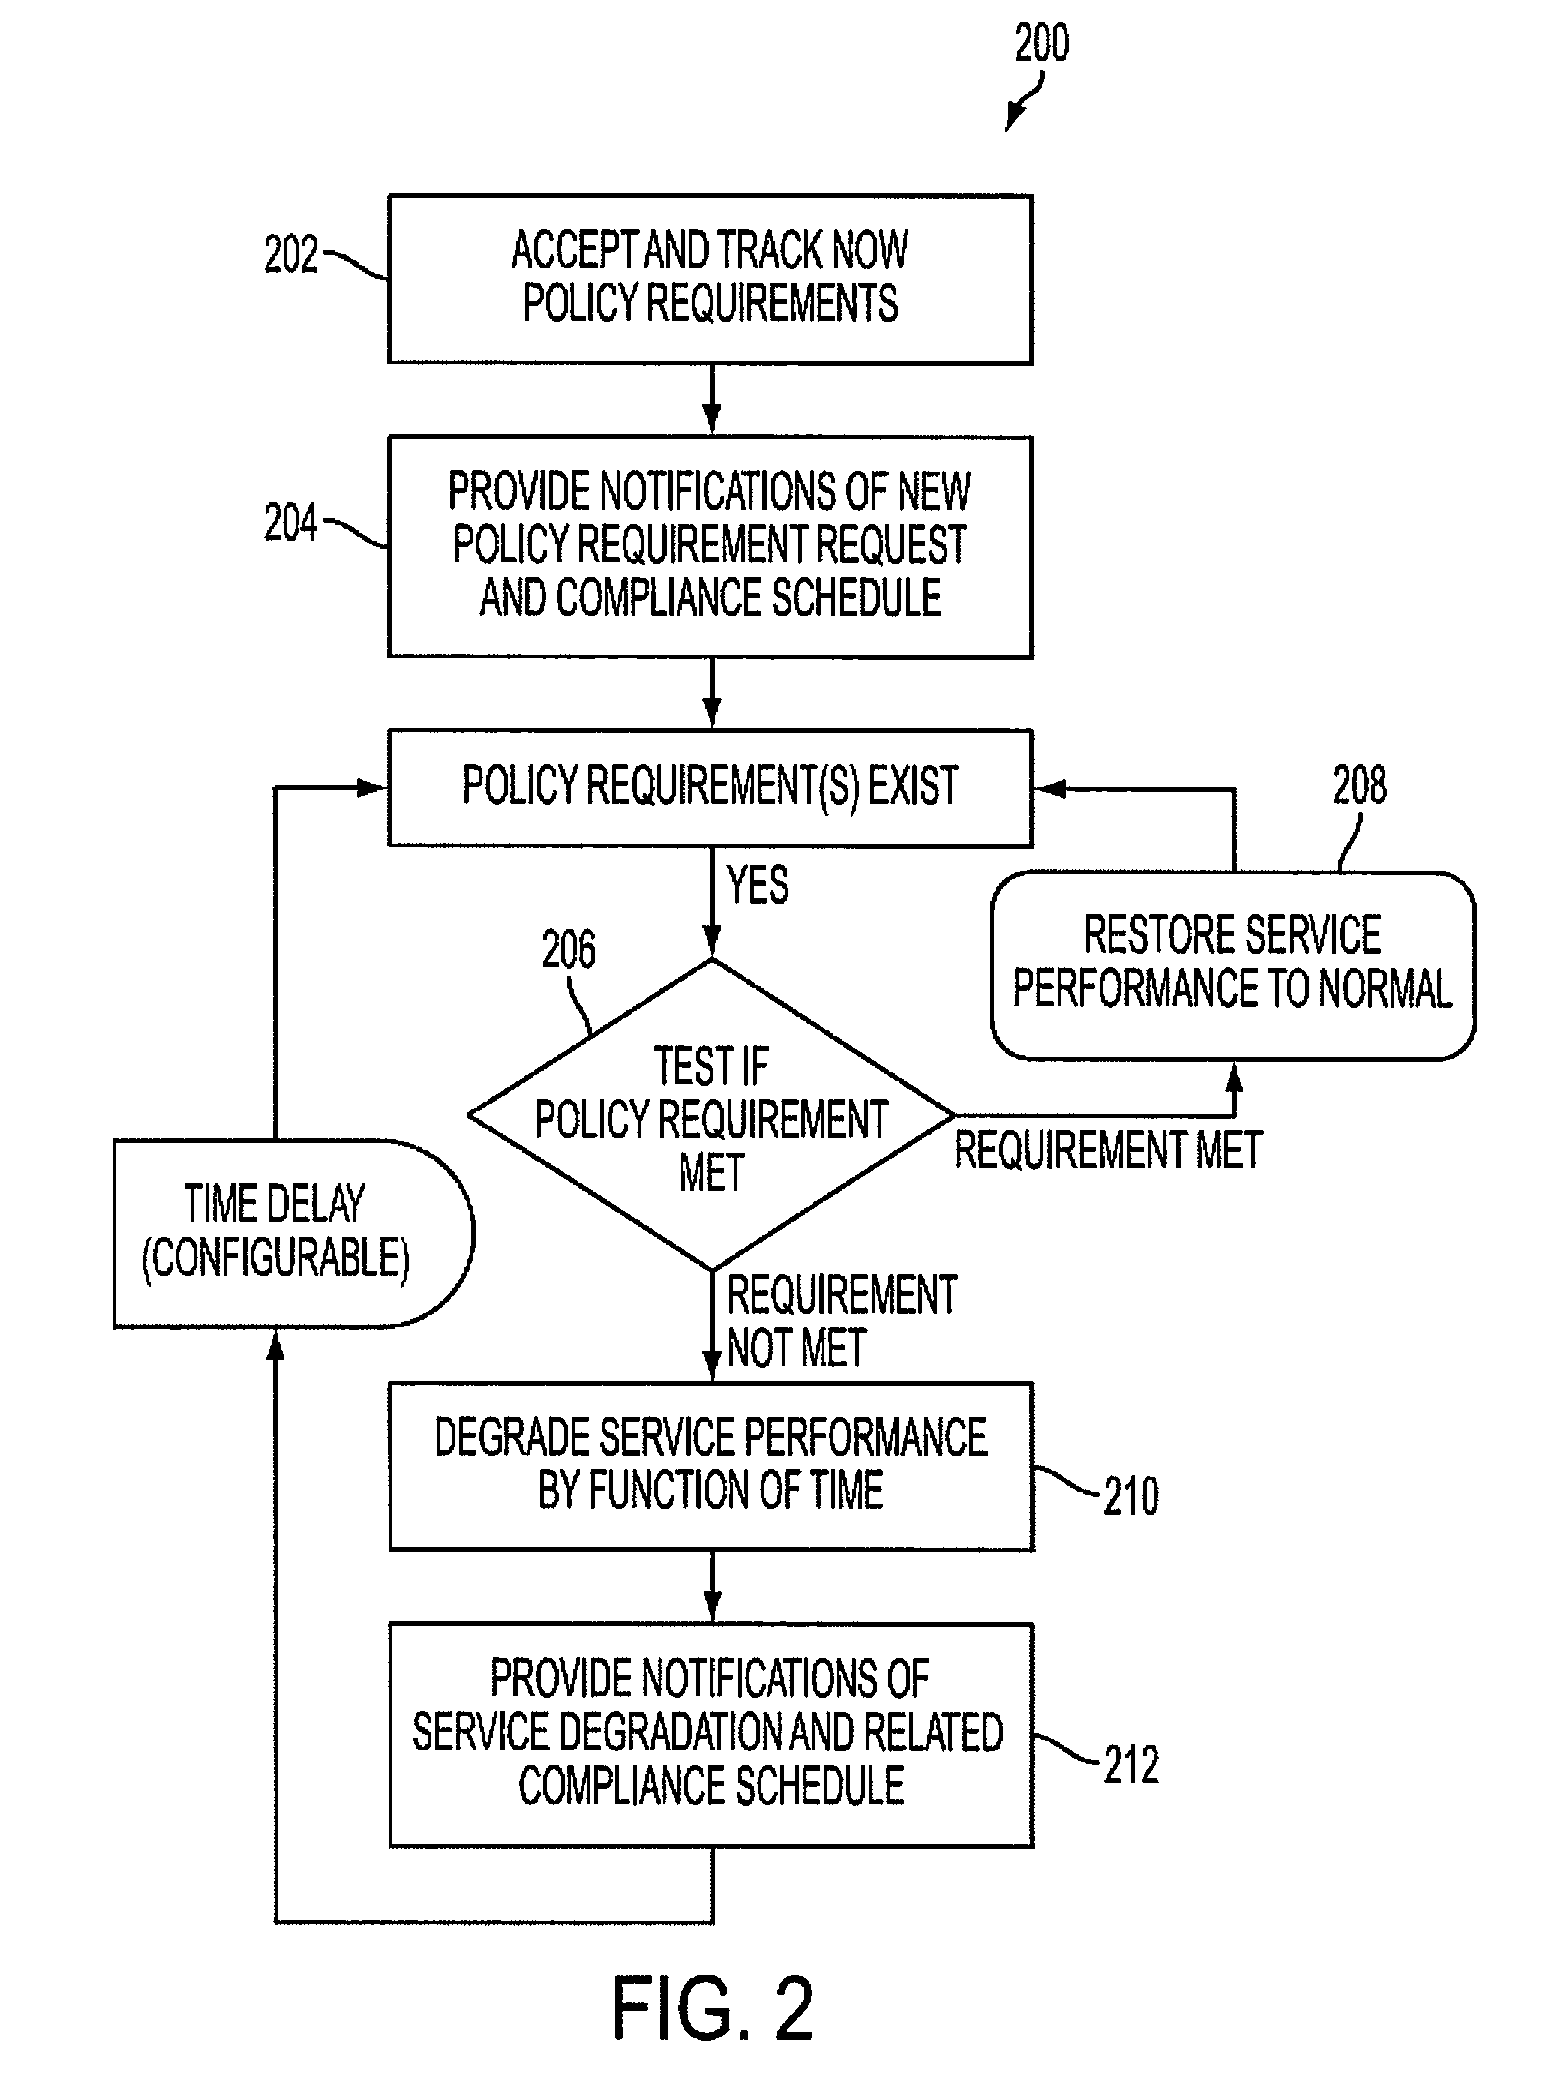 Apparatus, system, and method for enforcing policy requirements associated with a service